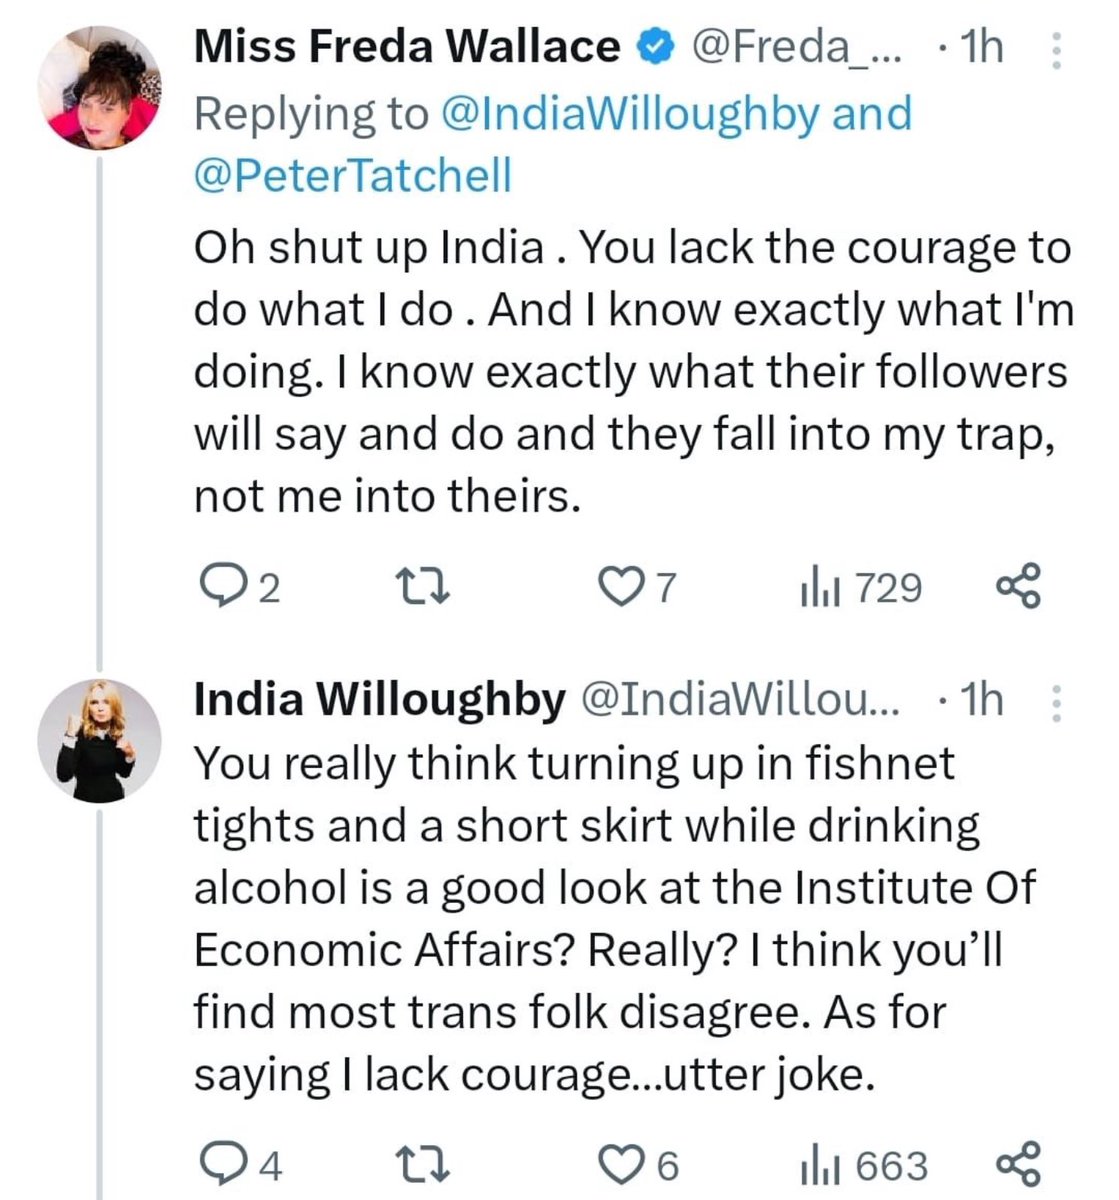 The gift that just keeps on giving 

Utterly joyous 

🤣🤣🤣🤣🤣

#FredaWallace
#IndiaWilloughby 
#LetWomenSpeak